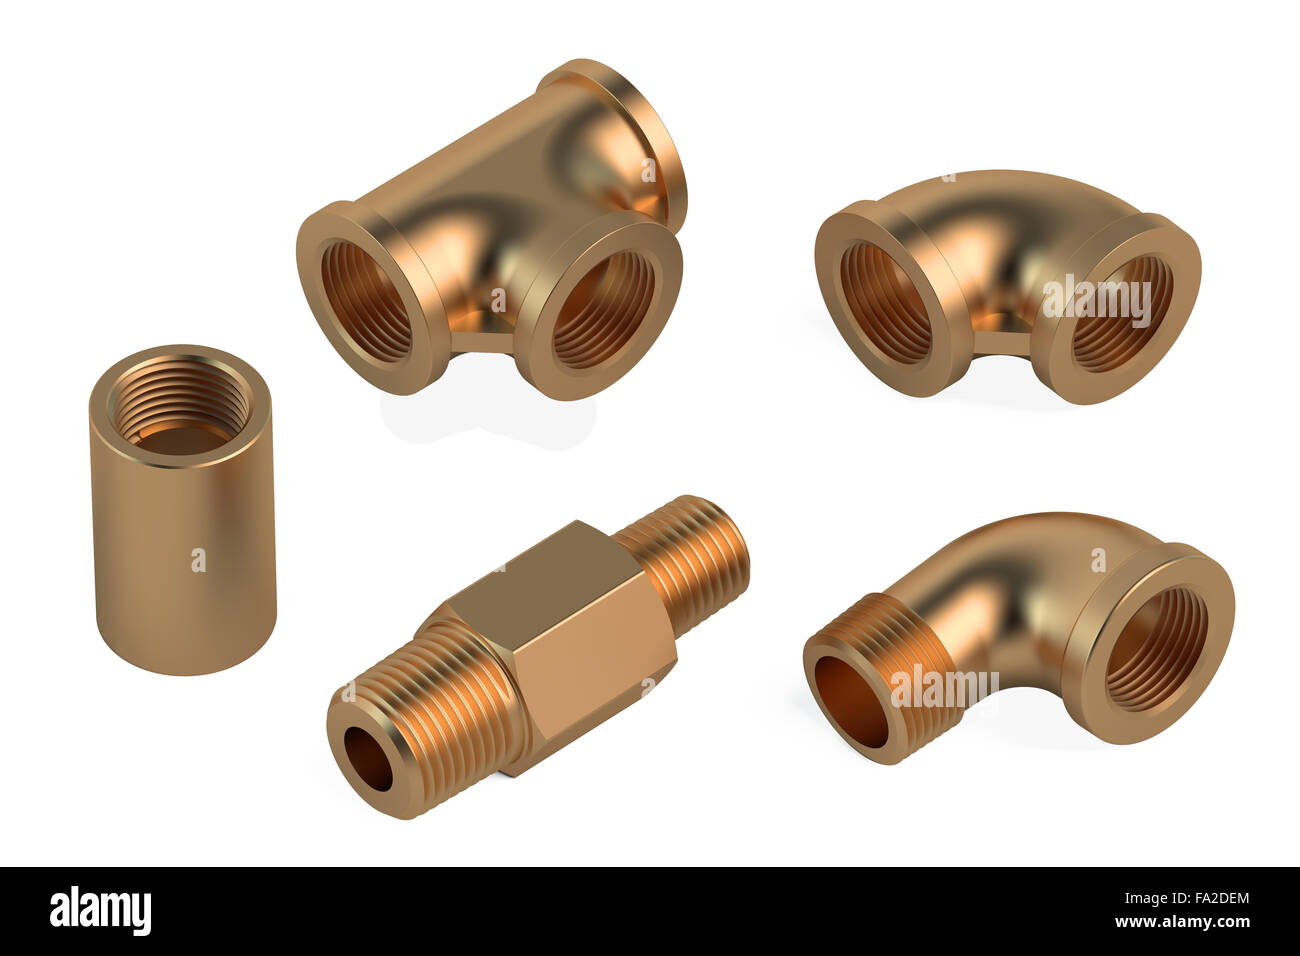 copper fittings for plumbing pipes isolated on white background Stock Photo